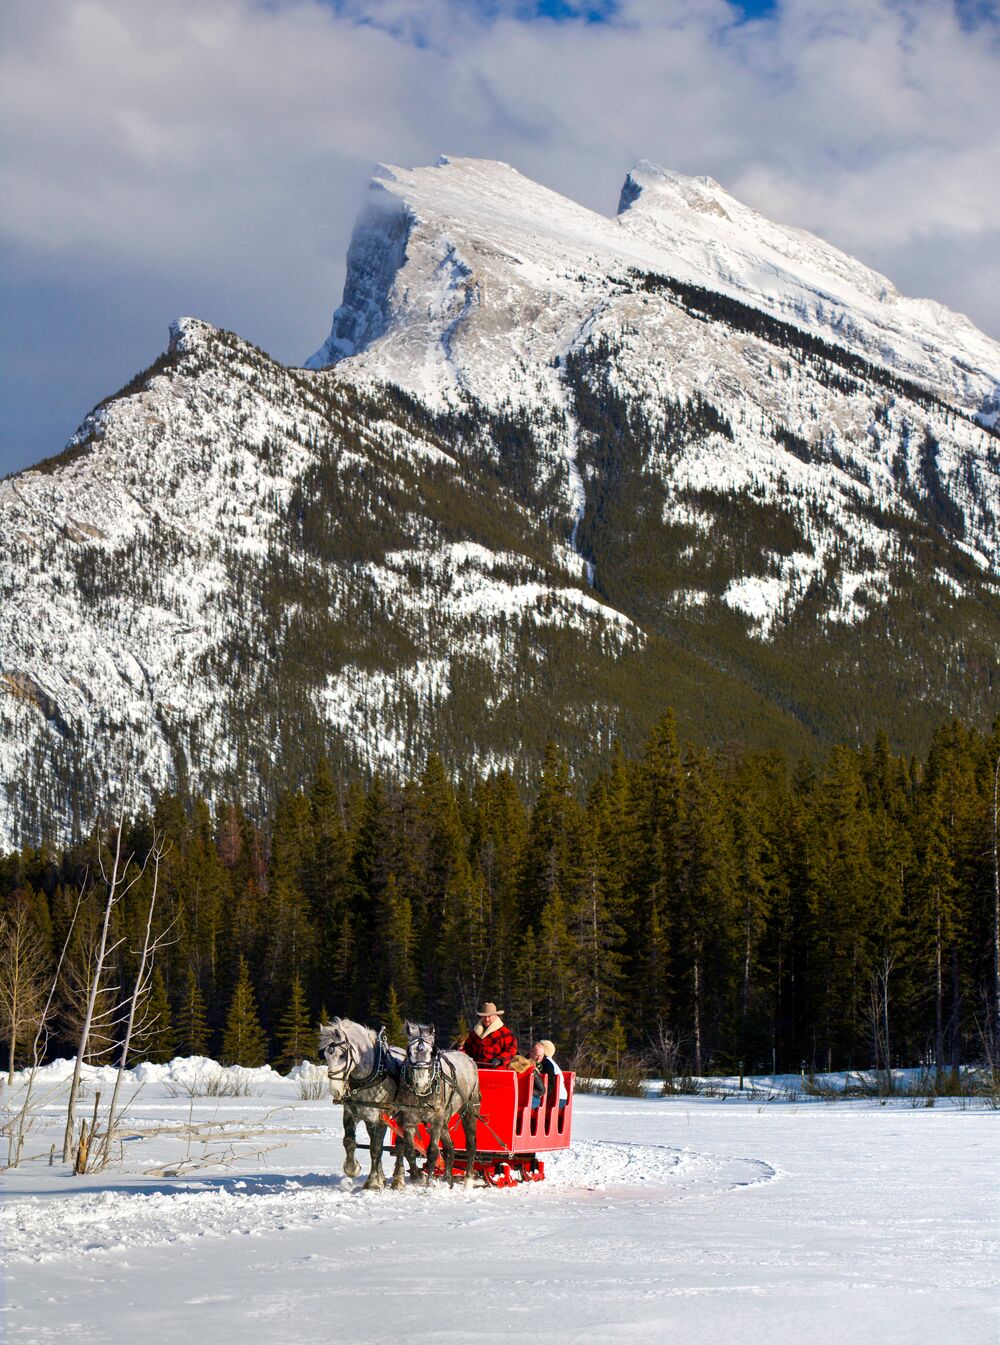 A horse-drawn sleigh in Banff National Park with Mount Rundle in the background.